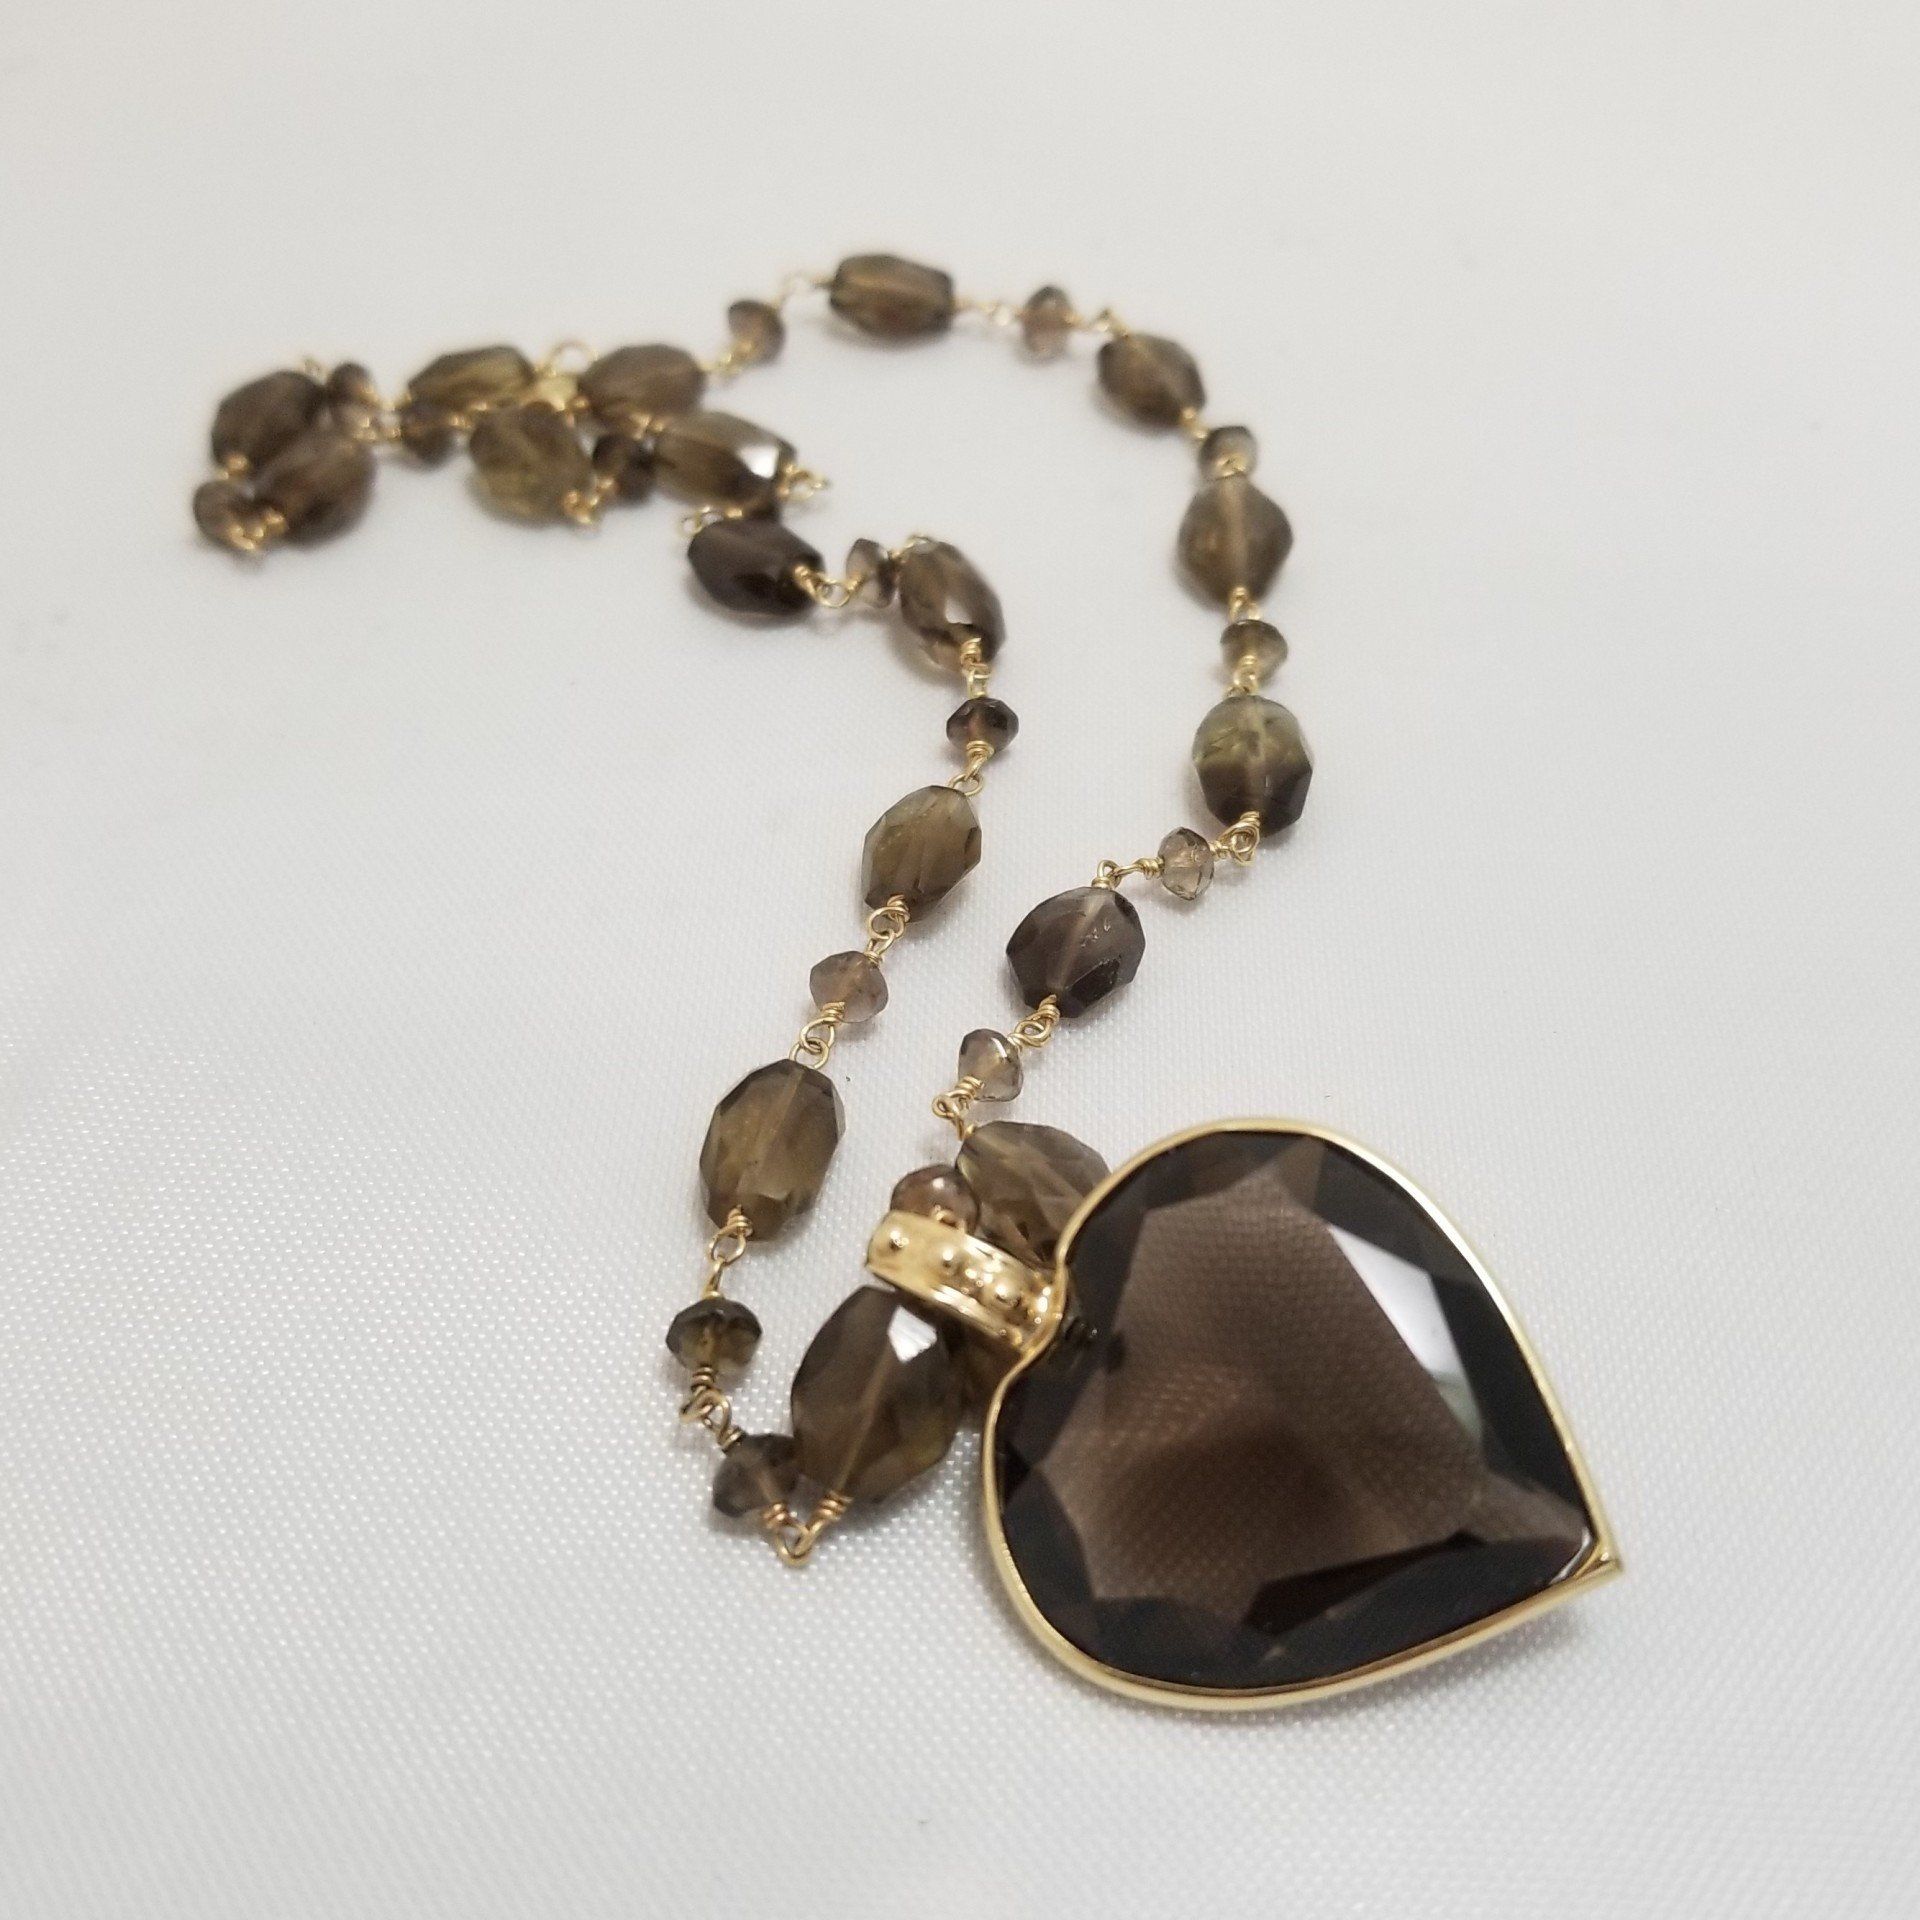 Gold Necklace — Necklace with Heart Pendant in Raleigh, NC